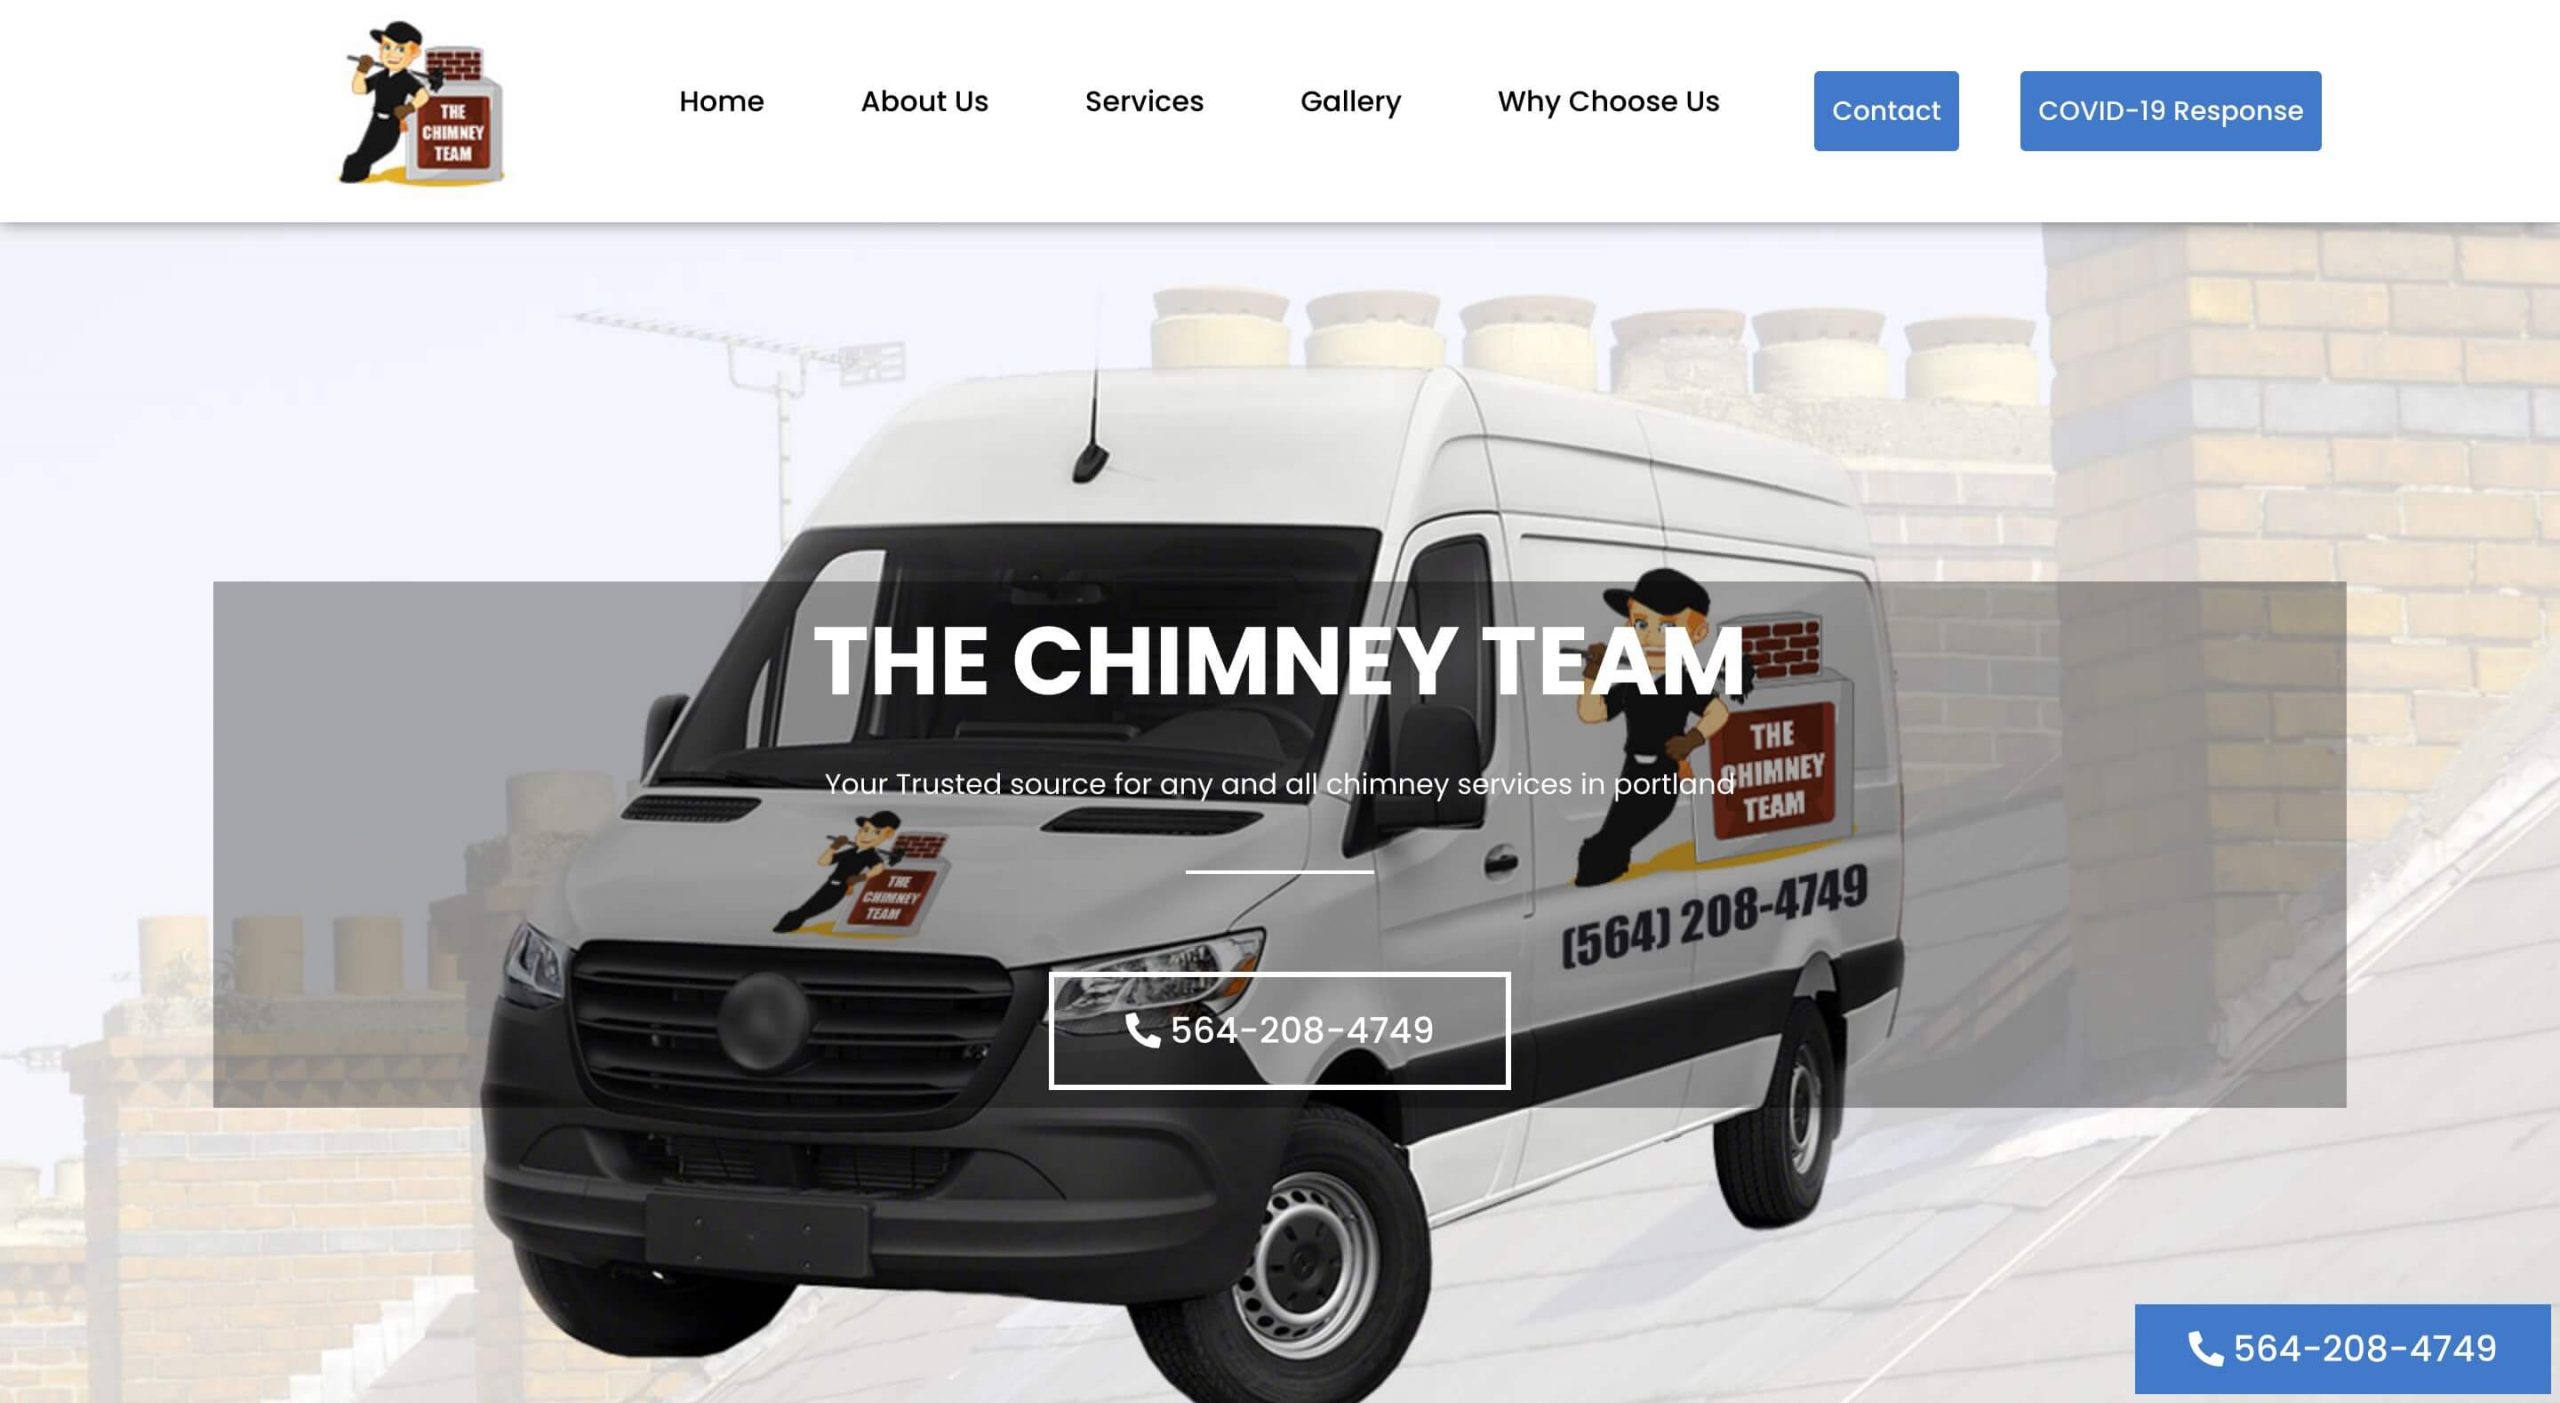 A website of chimney services in Portland, OR